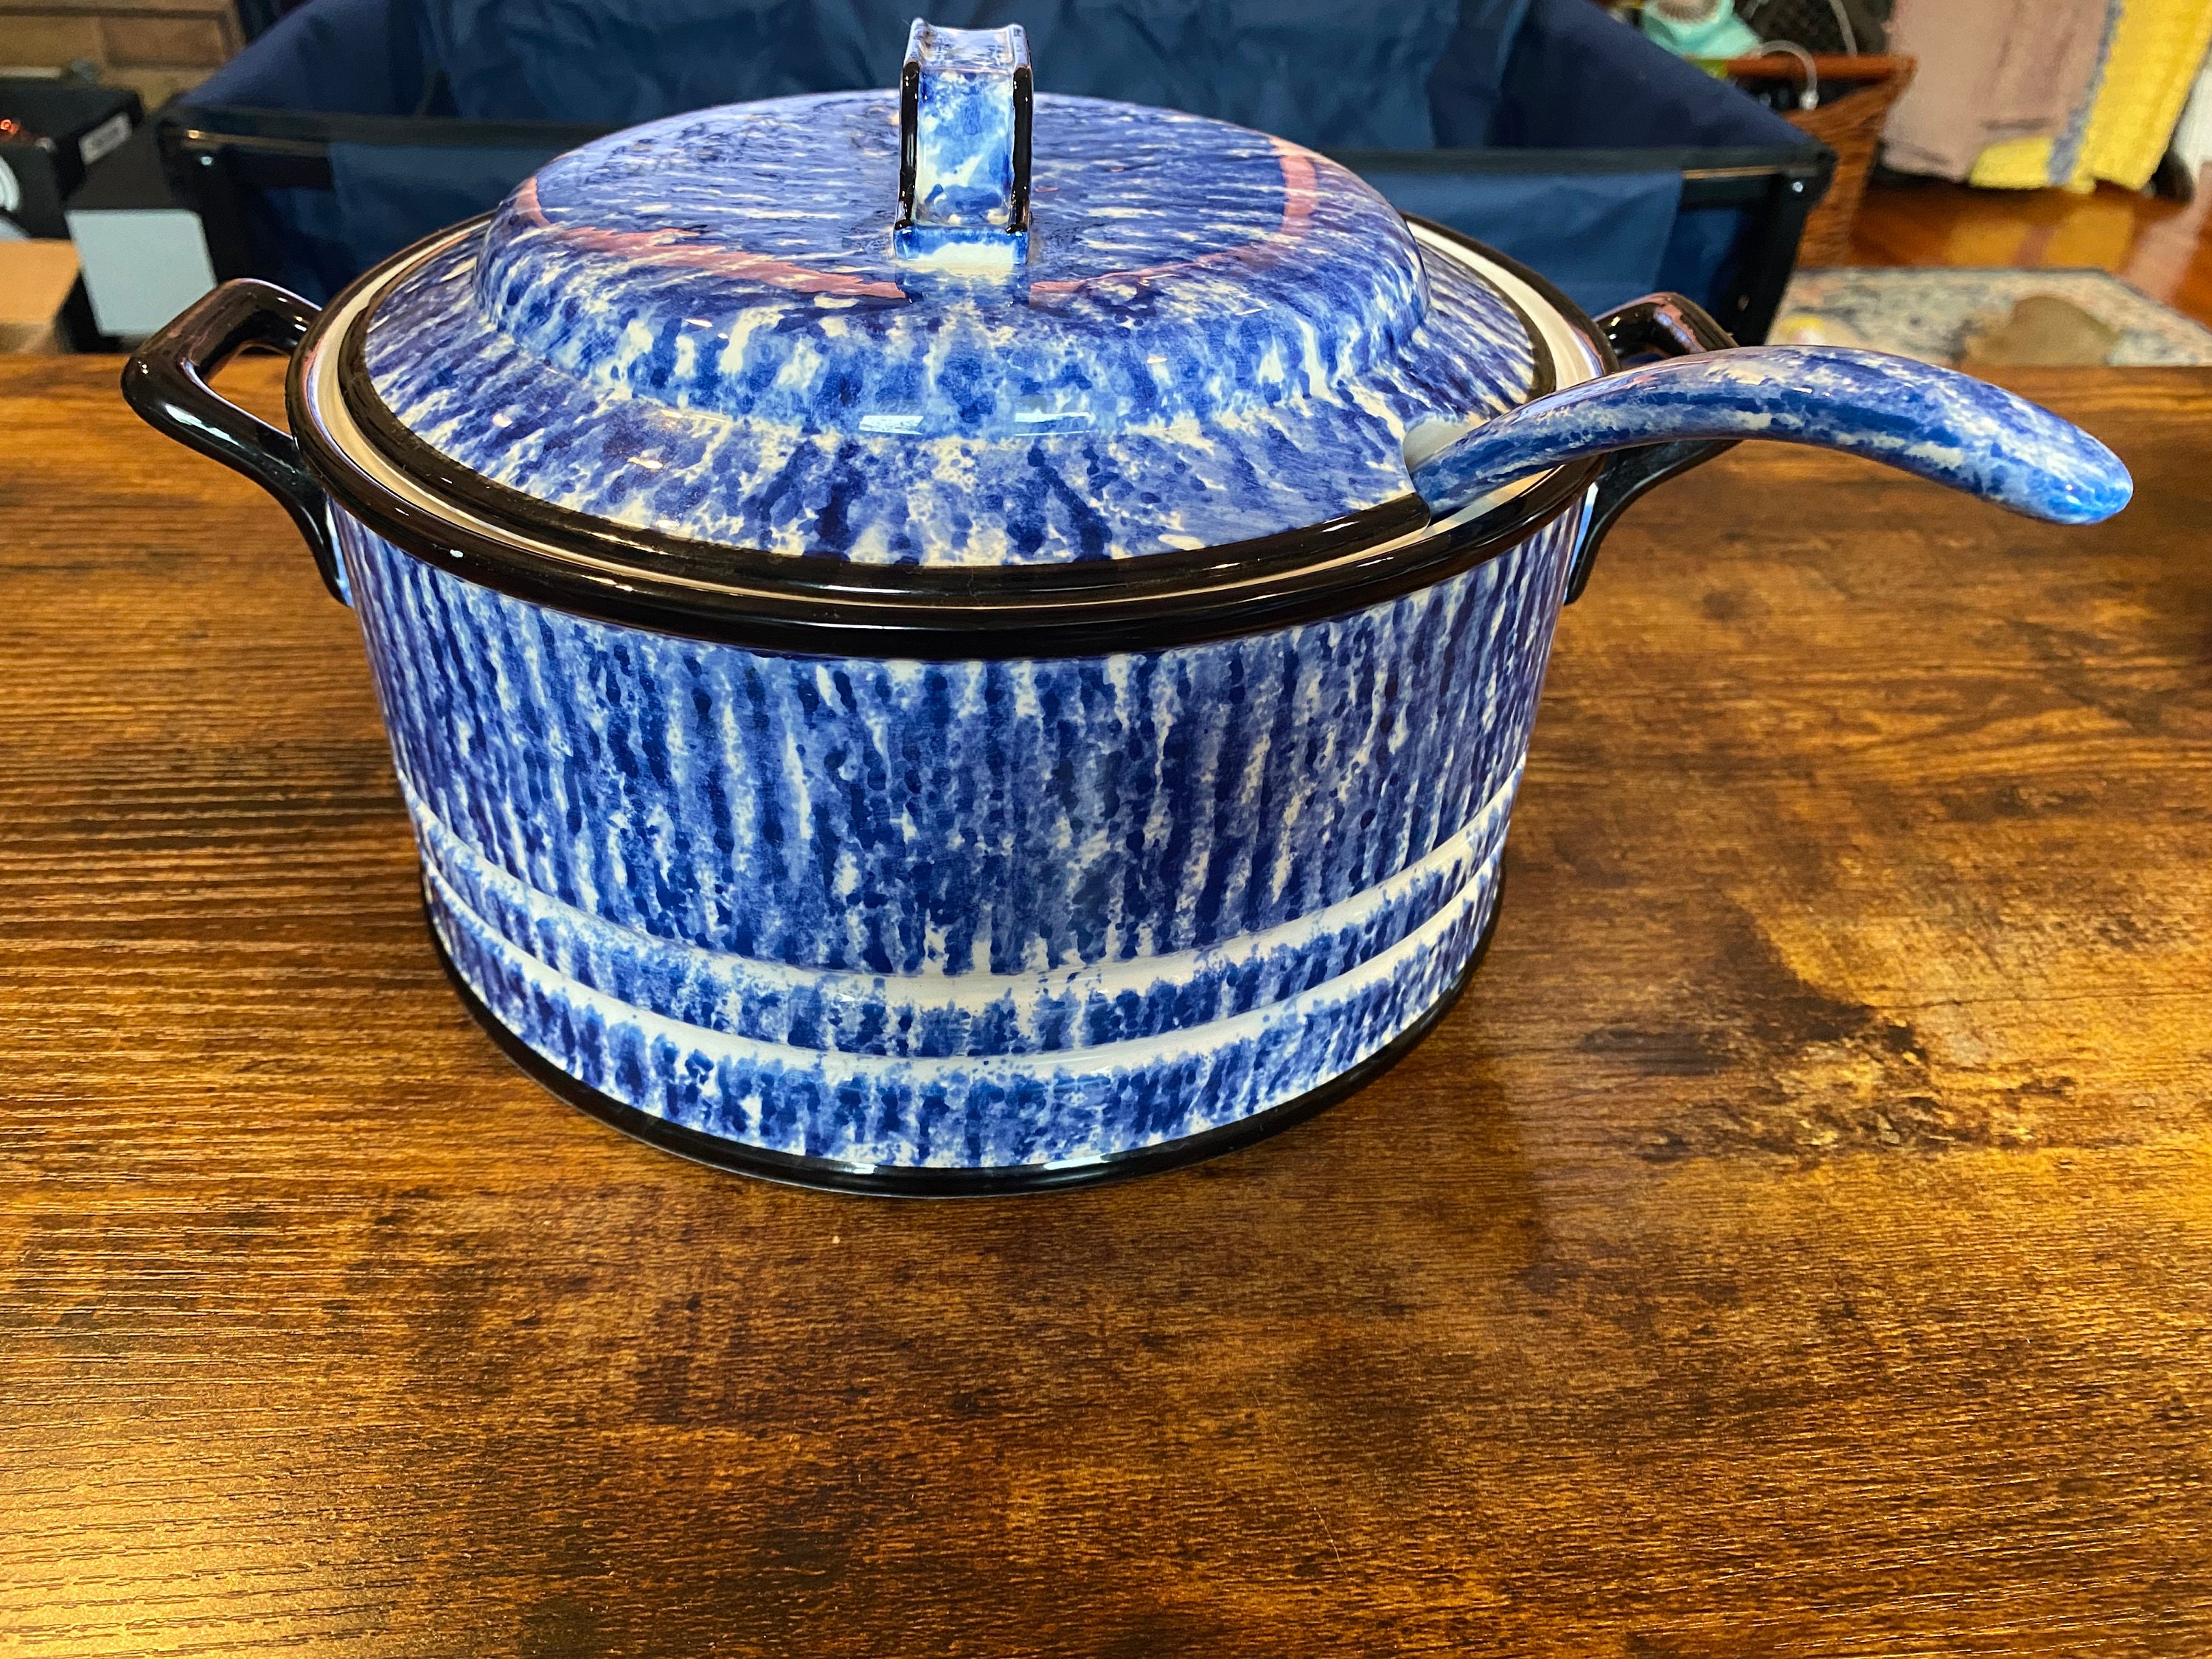 HANDMADE POTTERY CASSEROLE DISH BEAN POT BAKING DISH WITH LID OVEN PROOF  MICROWAVE SAFE DISH WASHER SAFE HANDCRAFTED STONEWARE HANDMADE CERAMICS by  GAULEY RIVER POTTERY WV